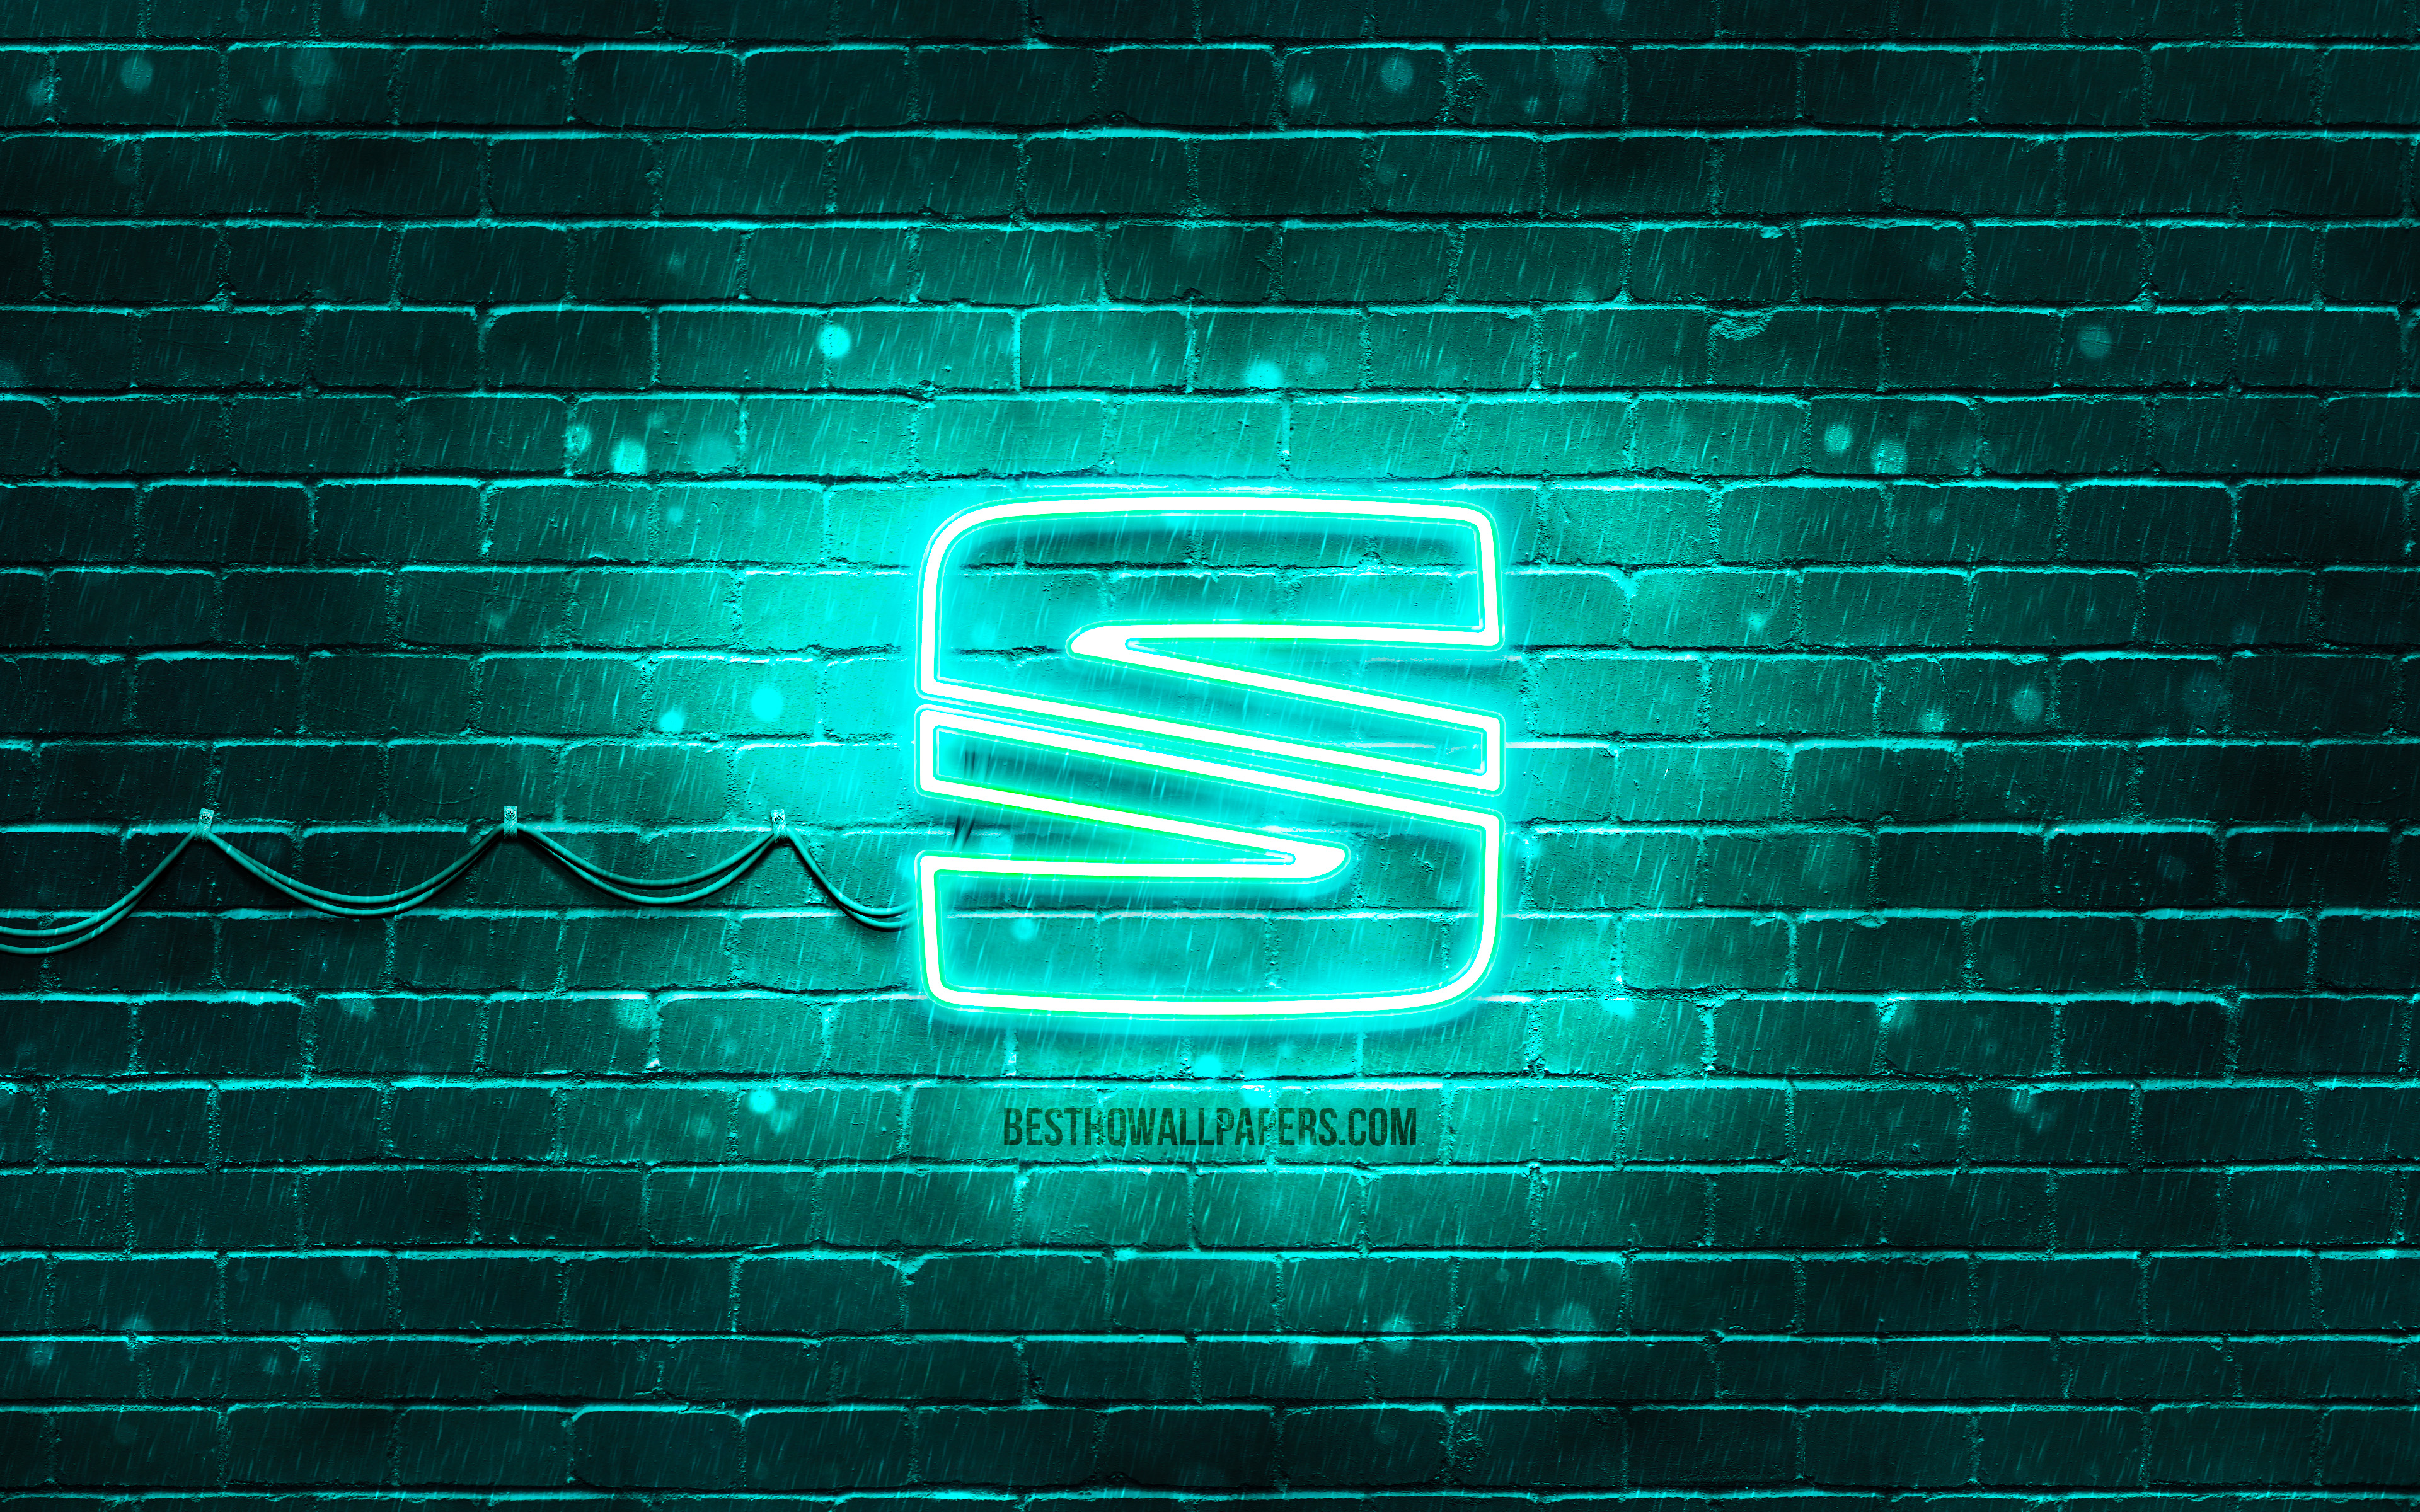 Download wallpaper Seat turquoise logo, 4k, turquoise brickwall, Seat logo, cars brands, Seat neon logo, Seat for desktop with resolution 3840x2400. High Quality HD picture wallpaper